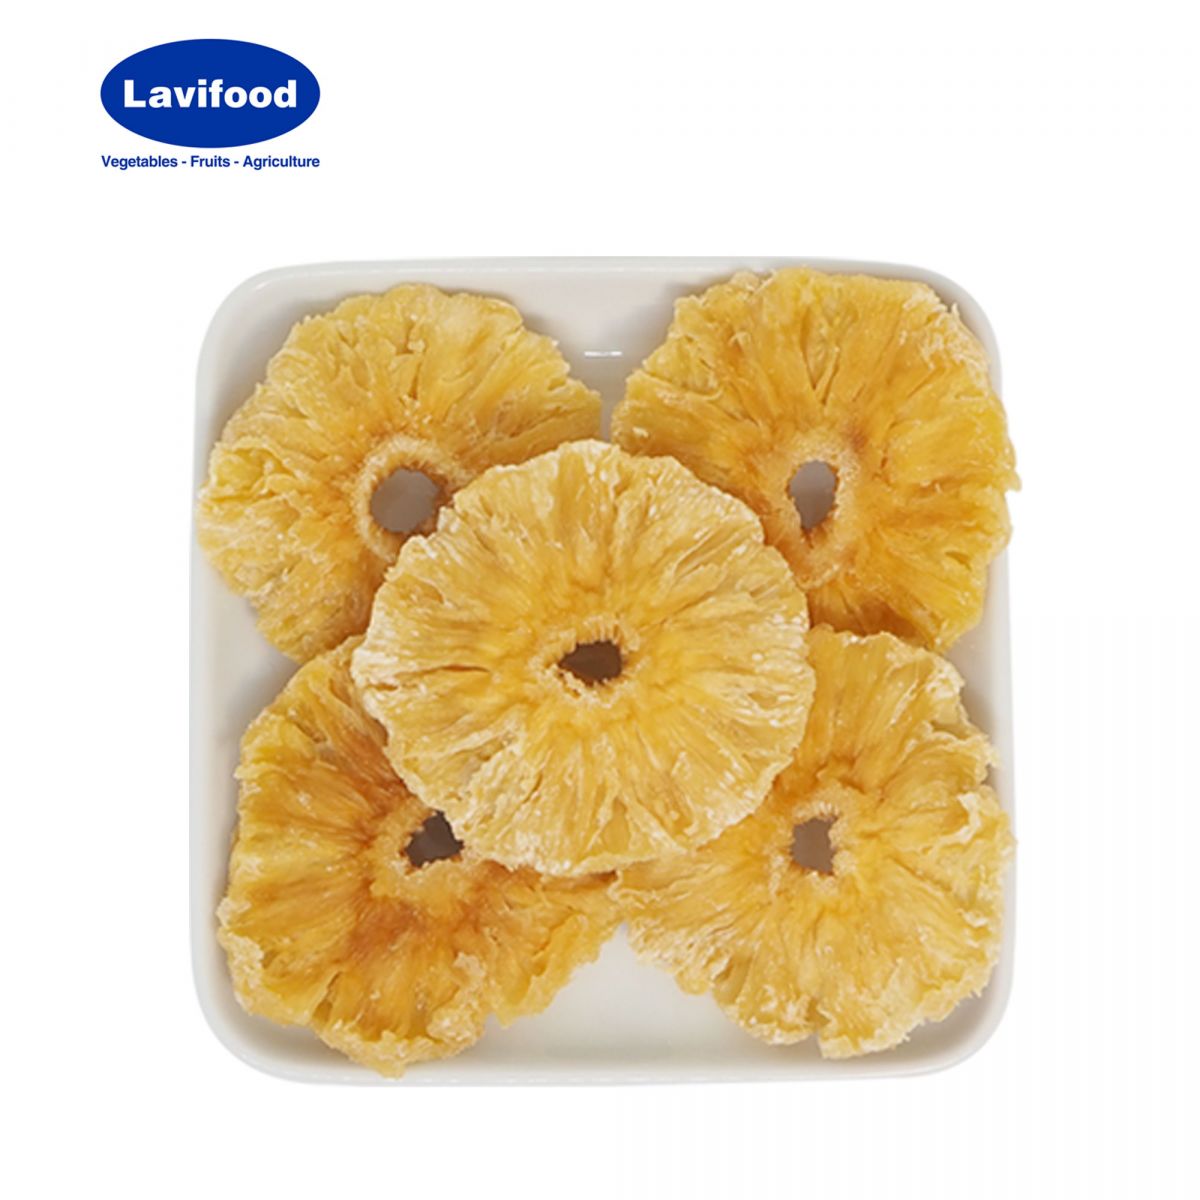 https://lavifood.com/en/products/dried-fruit-vegetables/dried-pinaeapple